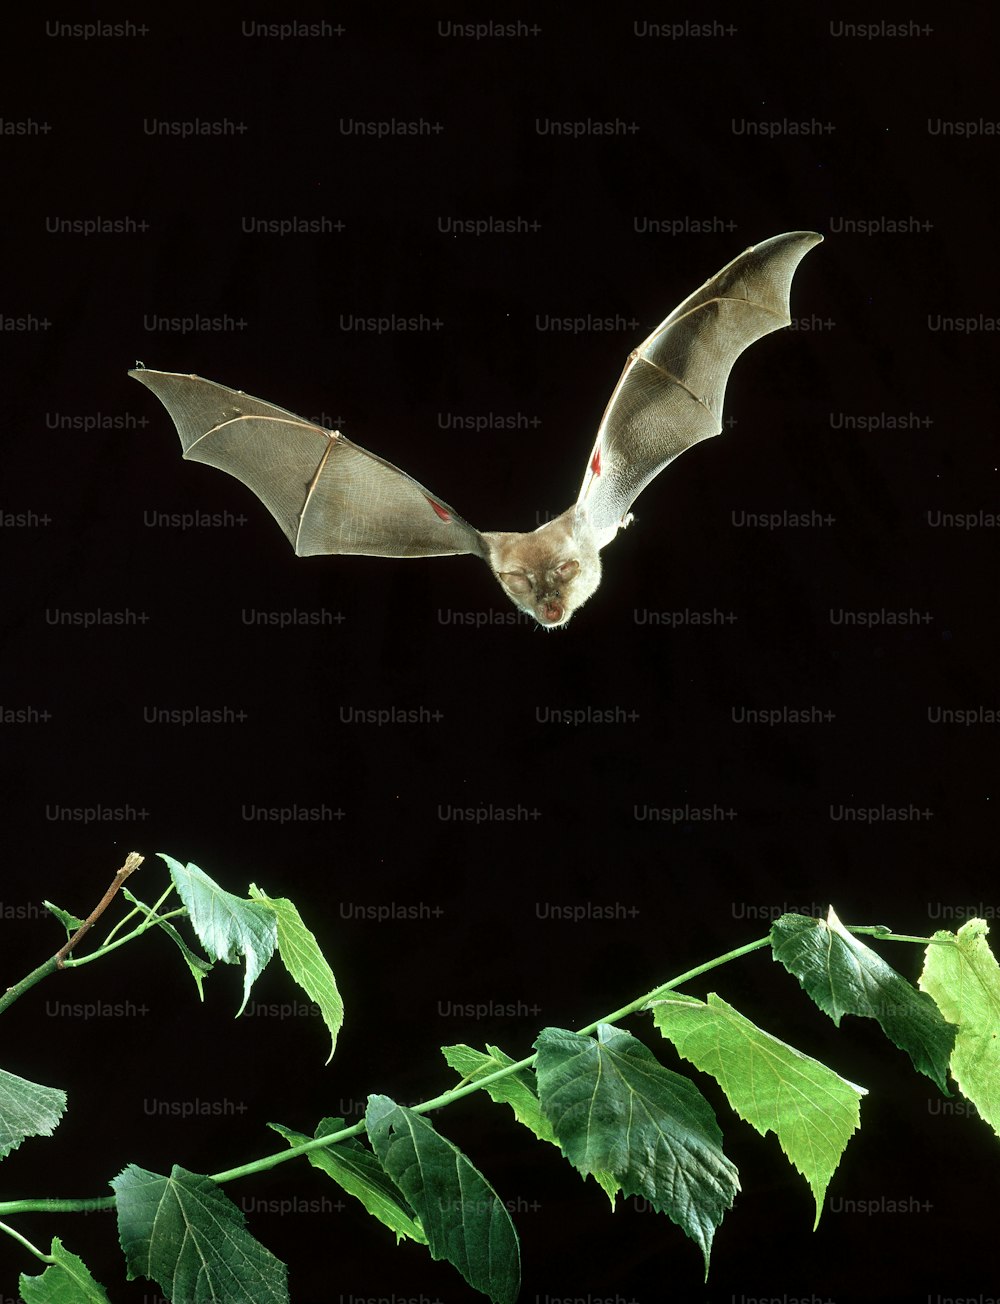 a bat is flying over a leafy plant